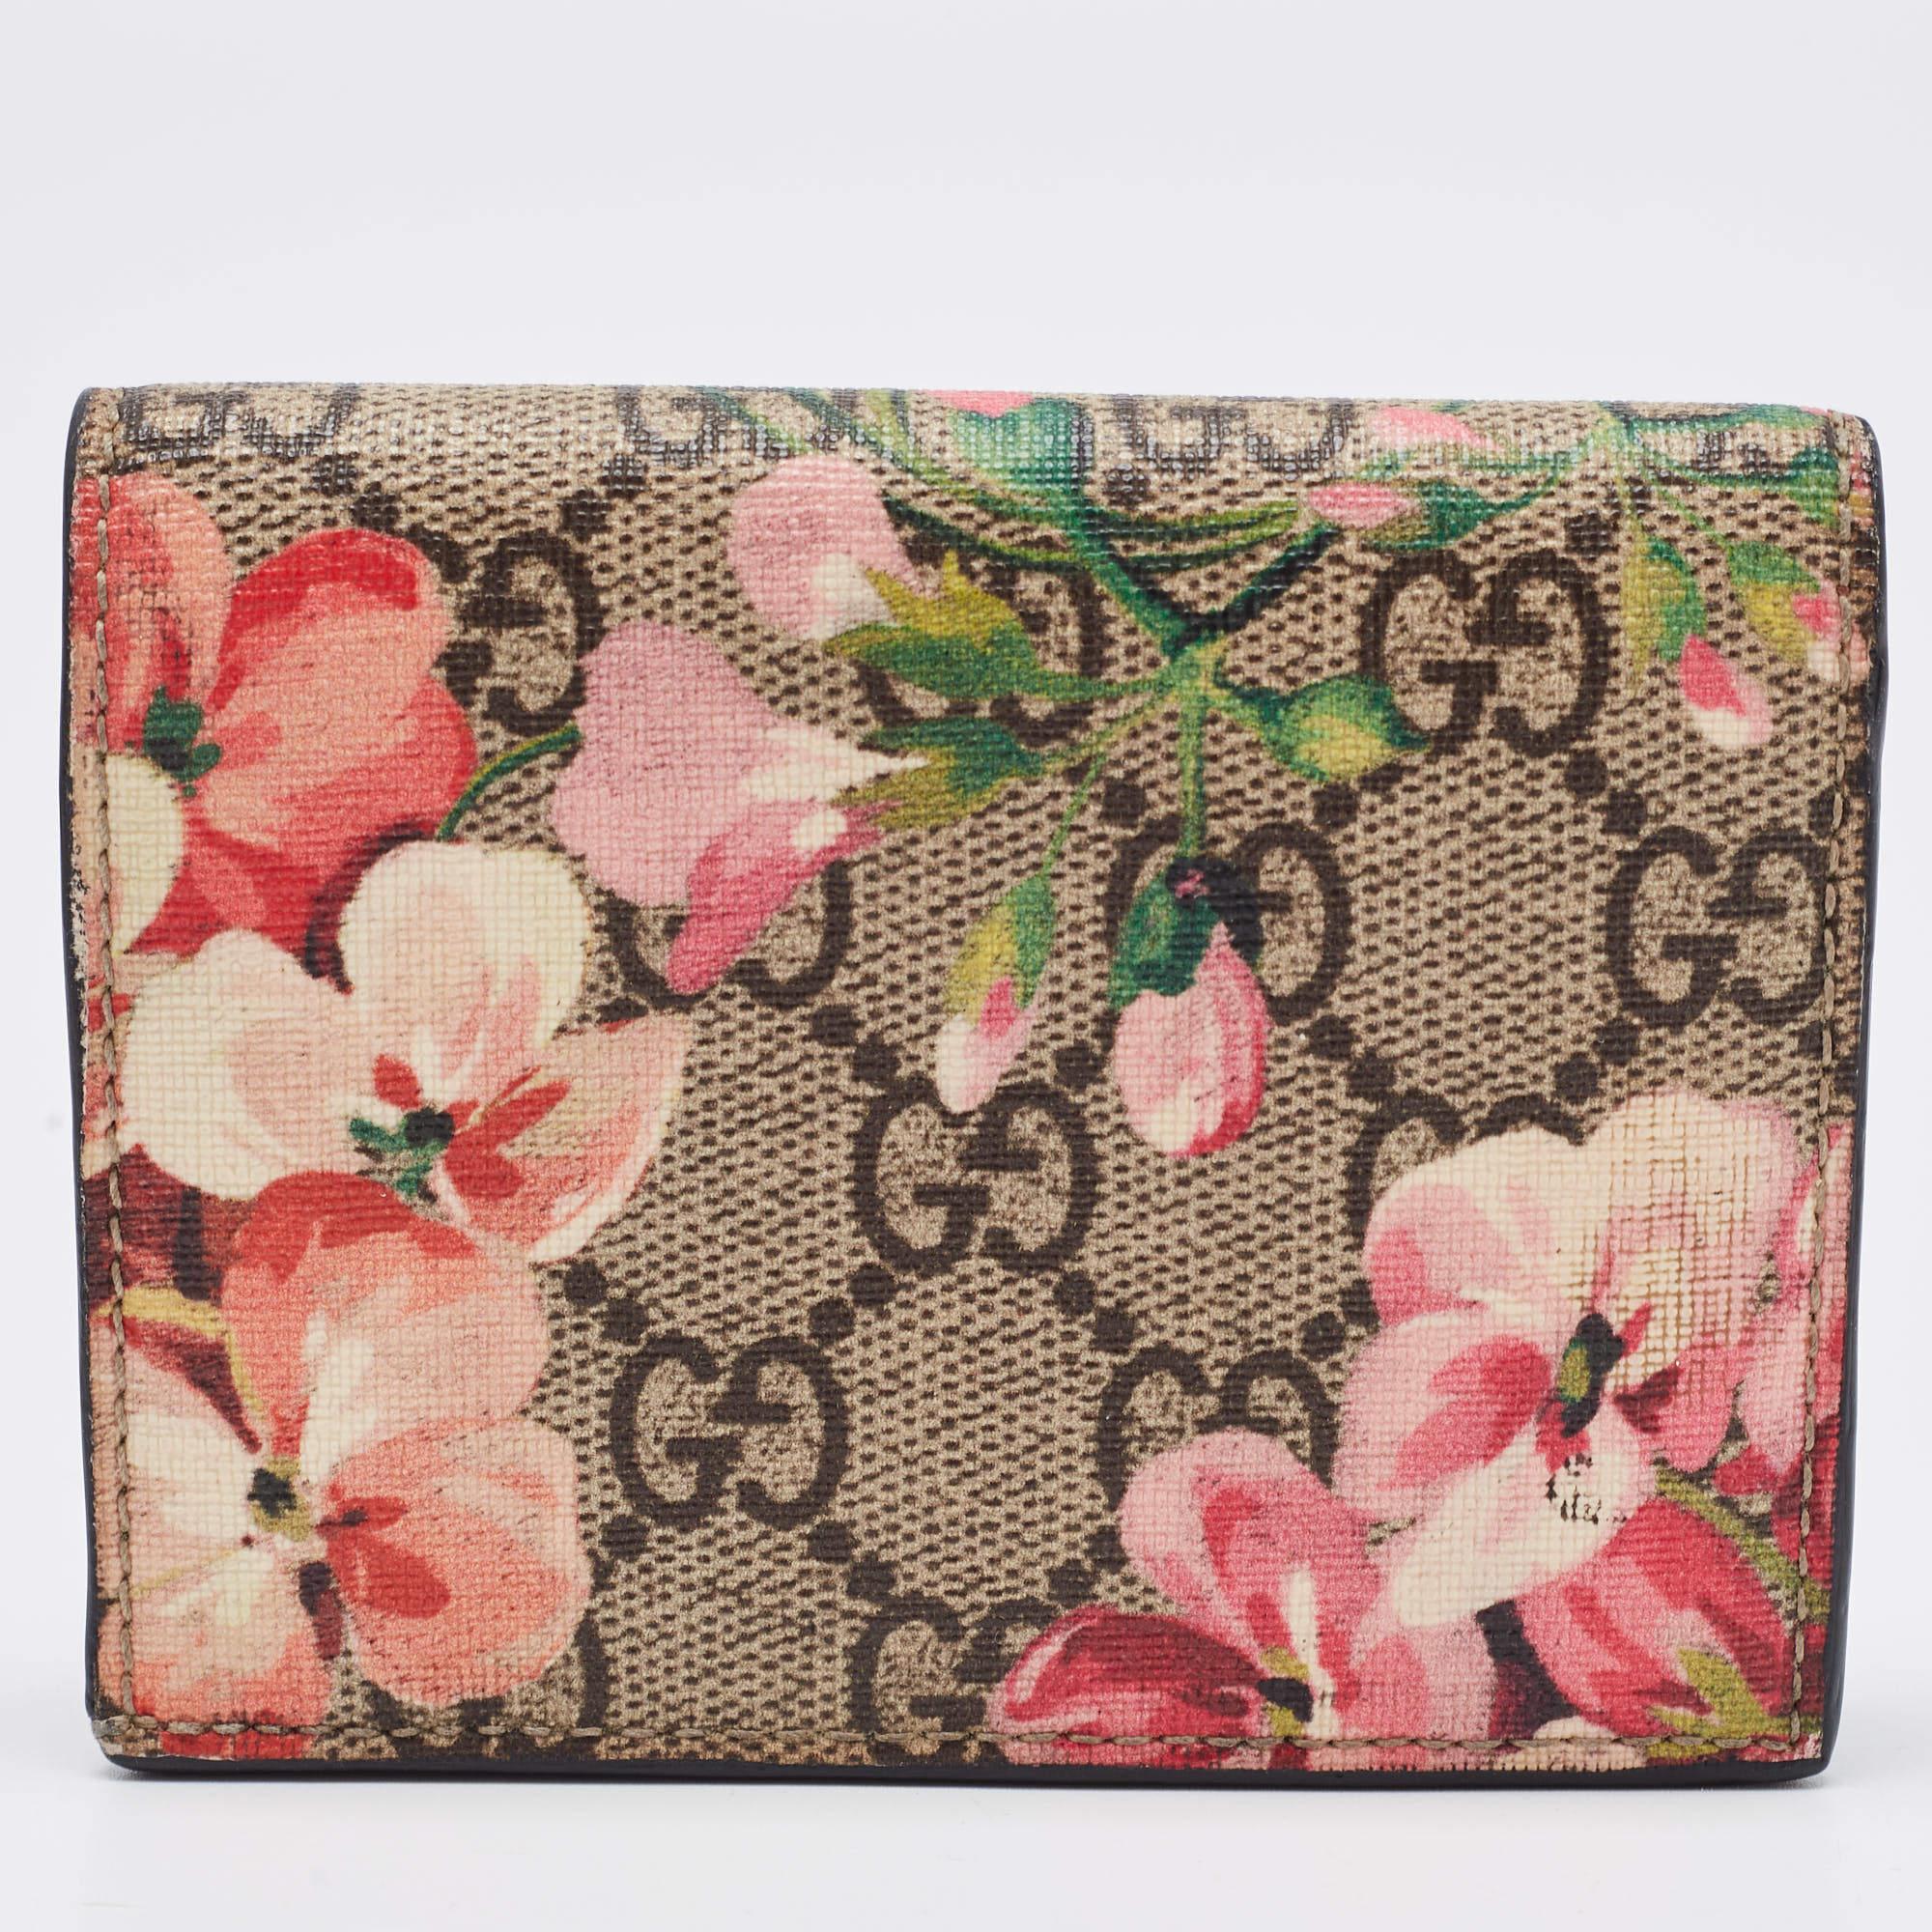 The Blooms range of designs by Gucci have gained such wide popularity around the world. It's time you update your wardrobe with a piece from that line. This card case, for example, is simply stylish. It comes made from GG Supreme canvas joined by